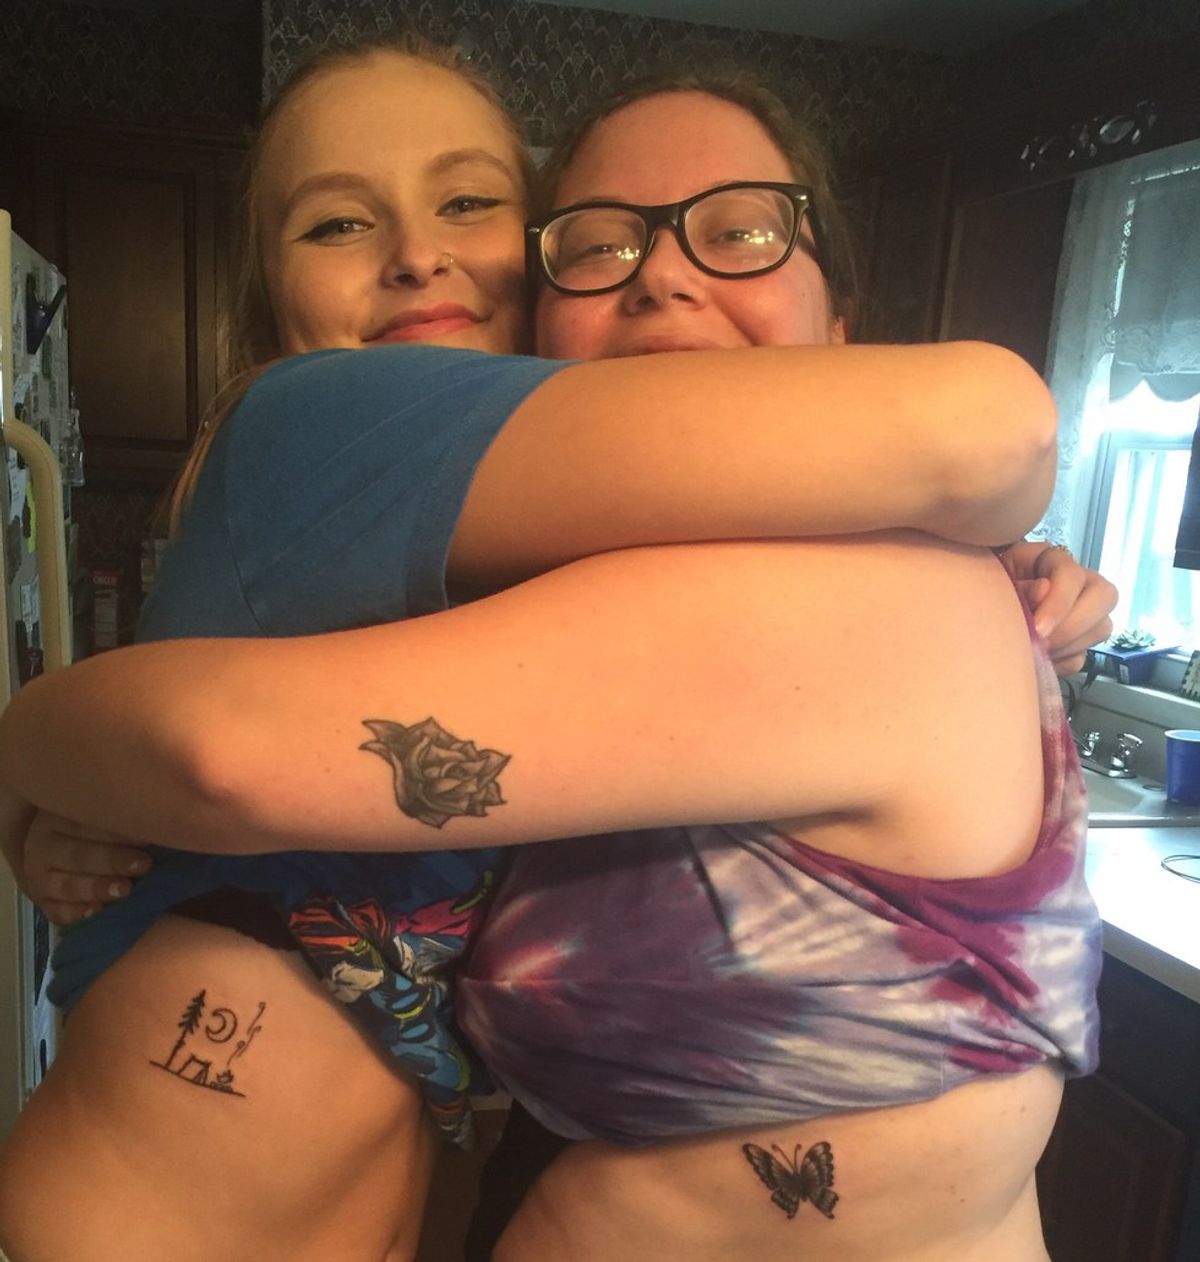 Getting a Tattoo With Your Best Friend